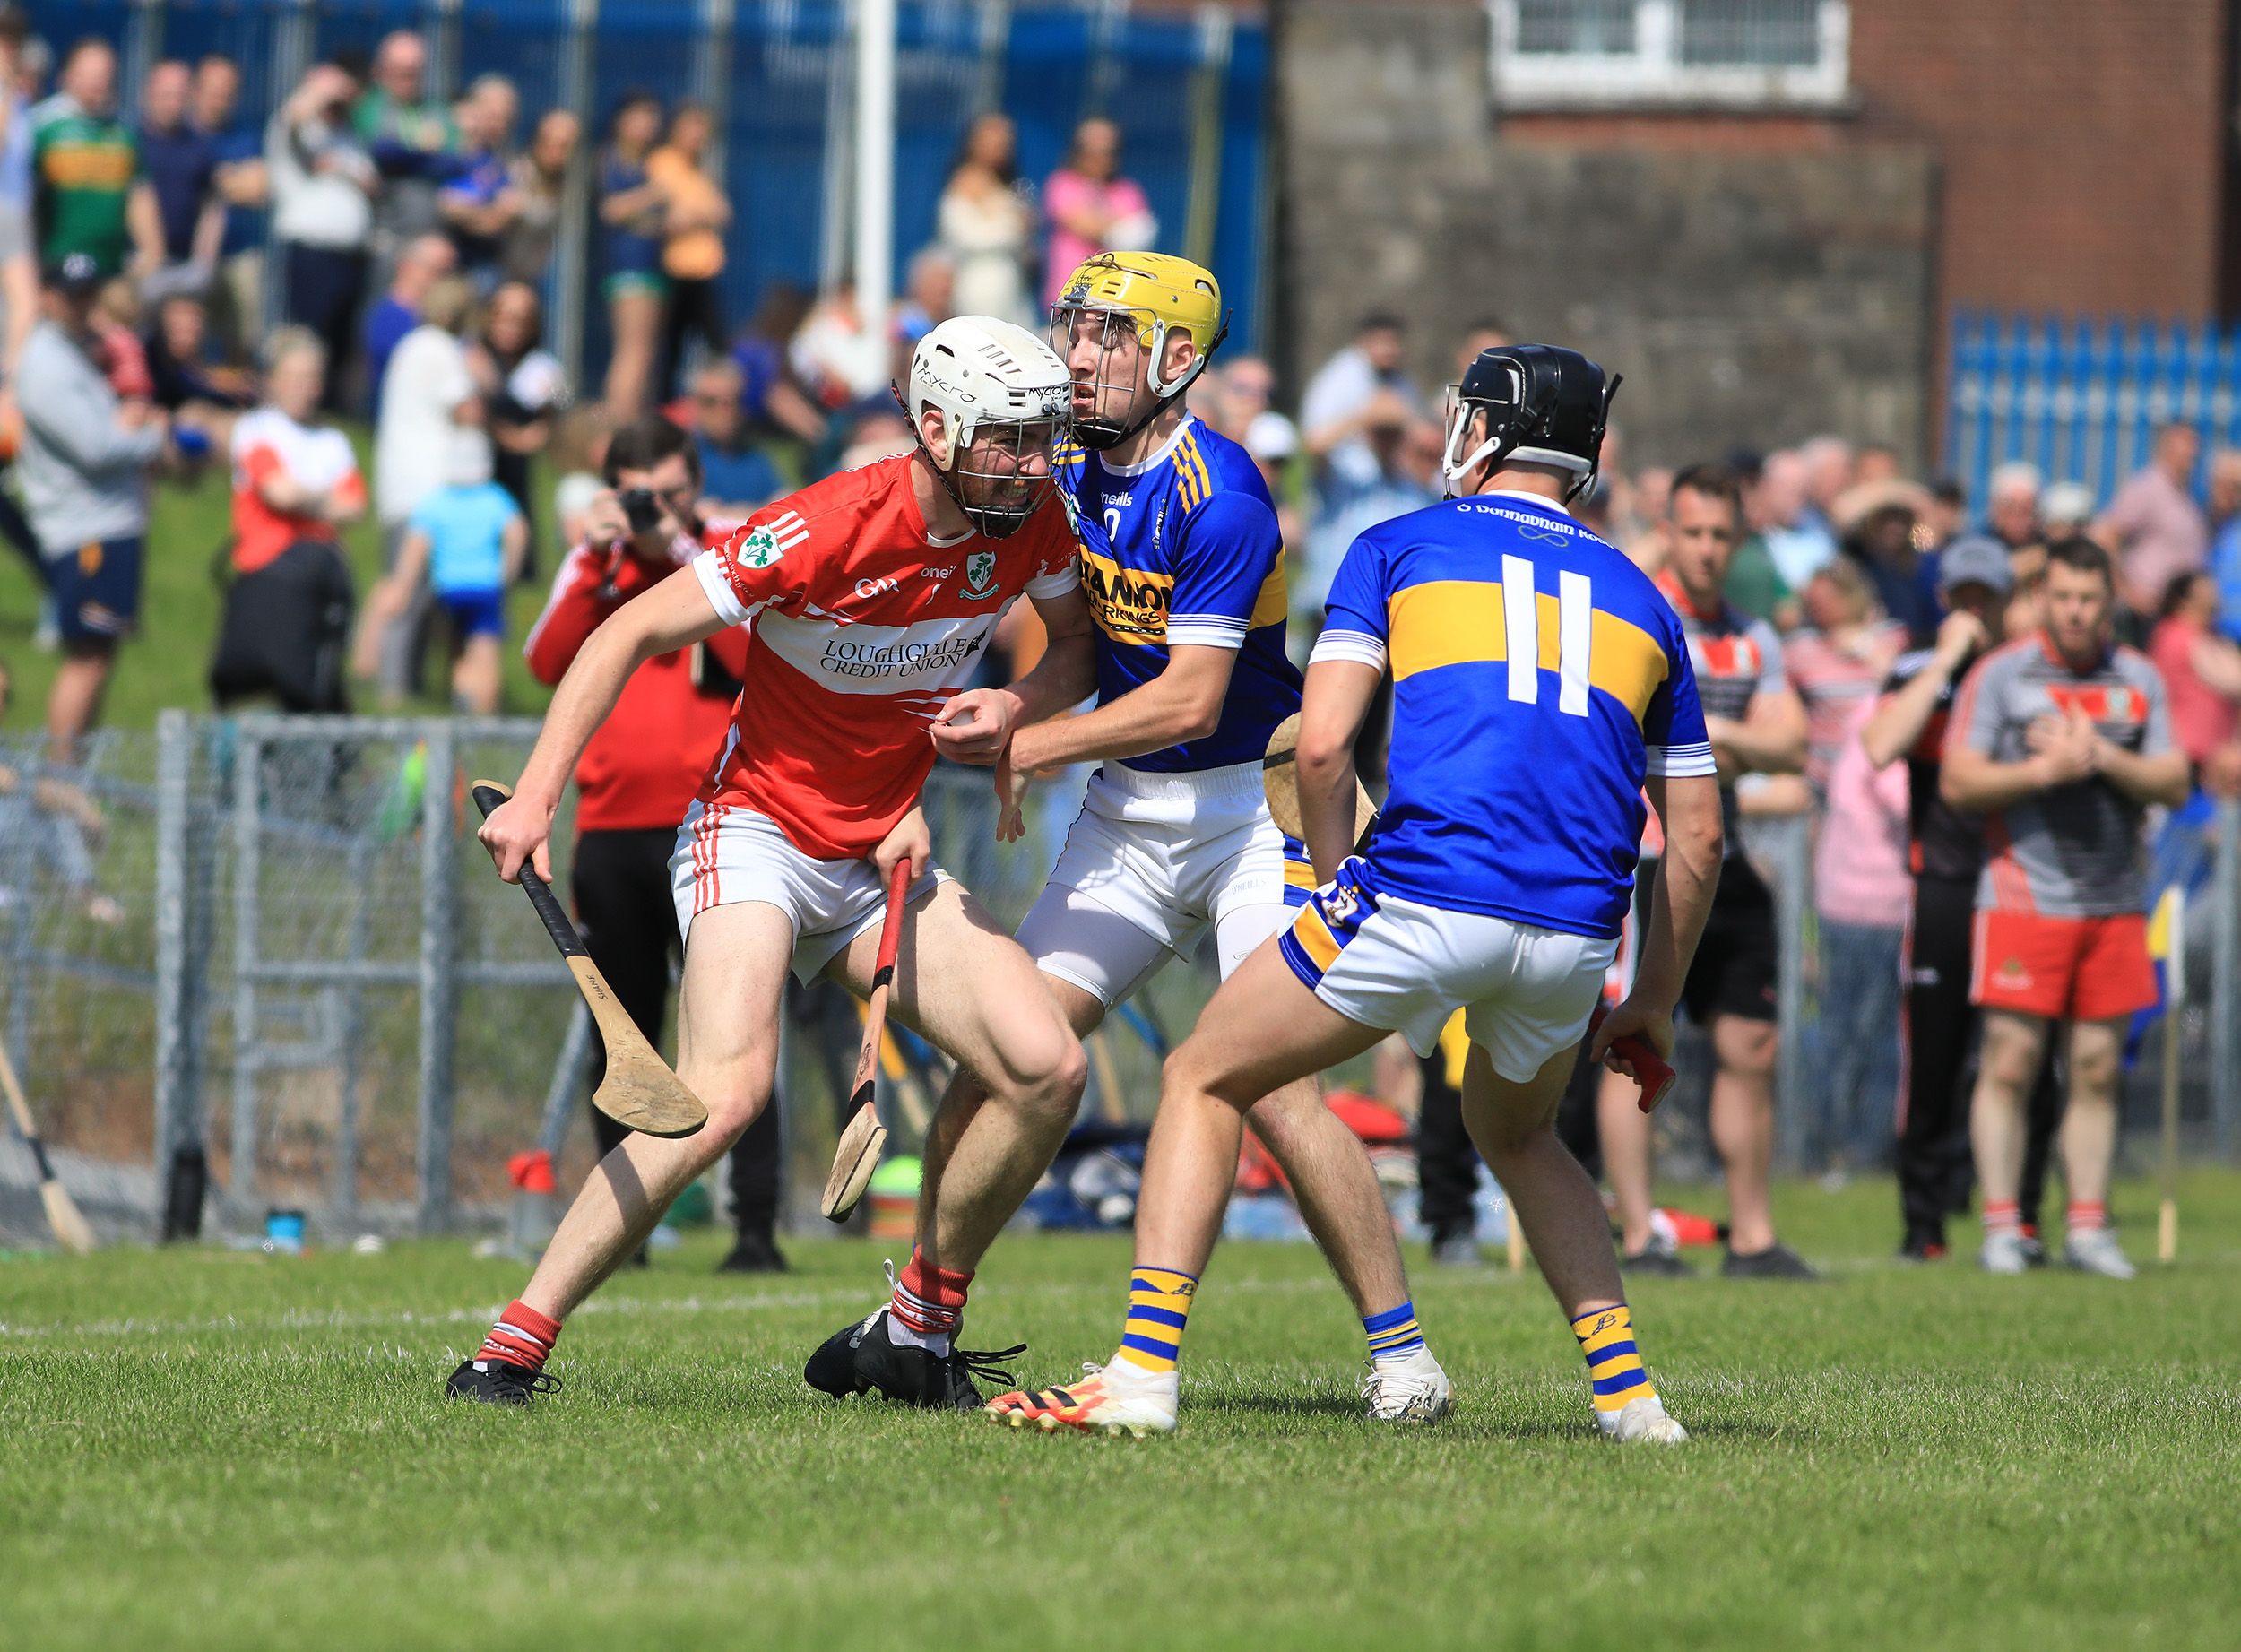 Action from Rossa Park on Sunday 